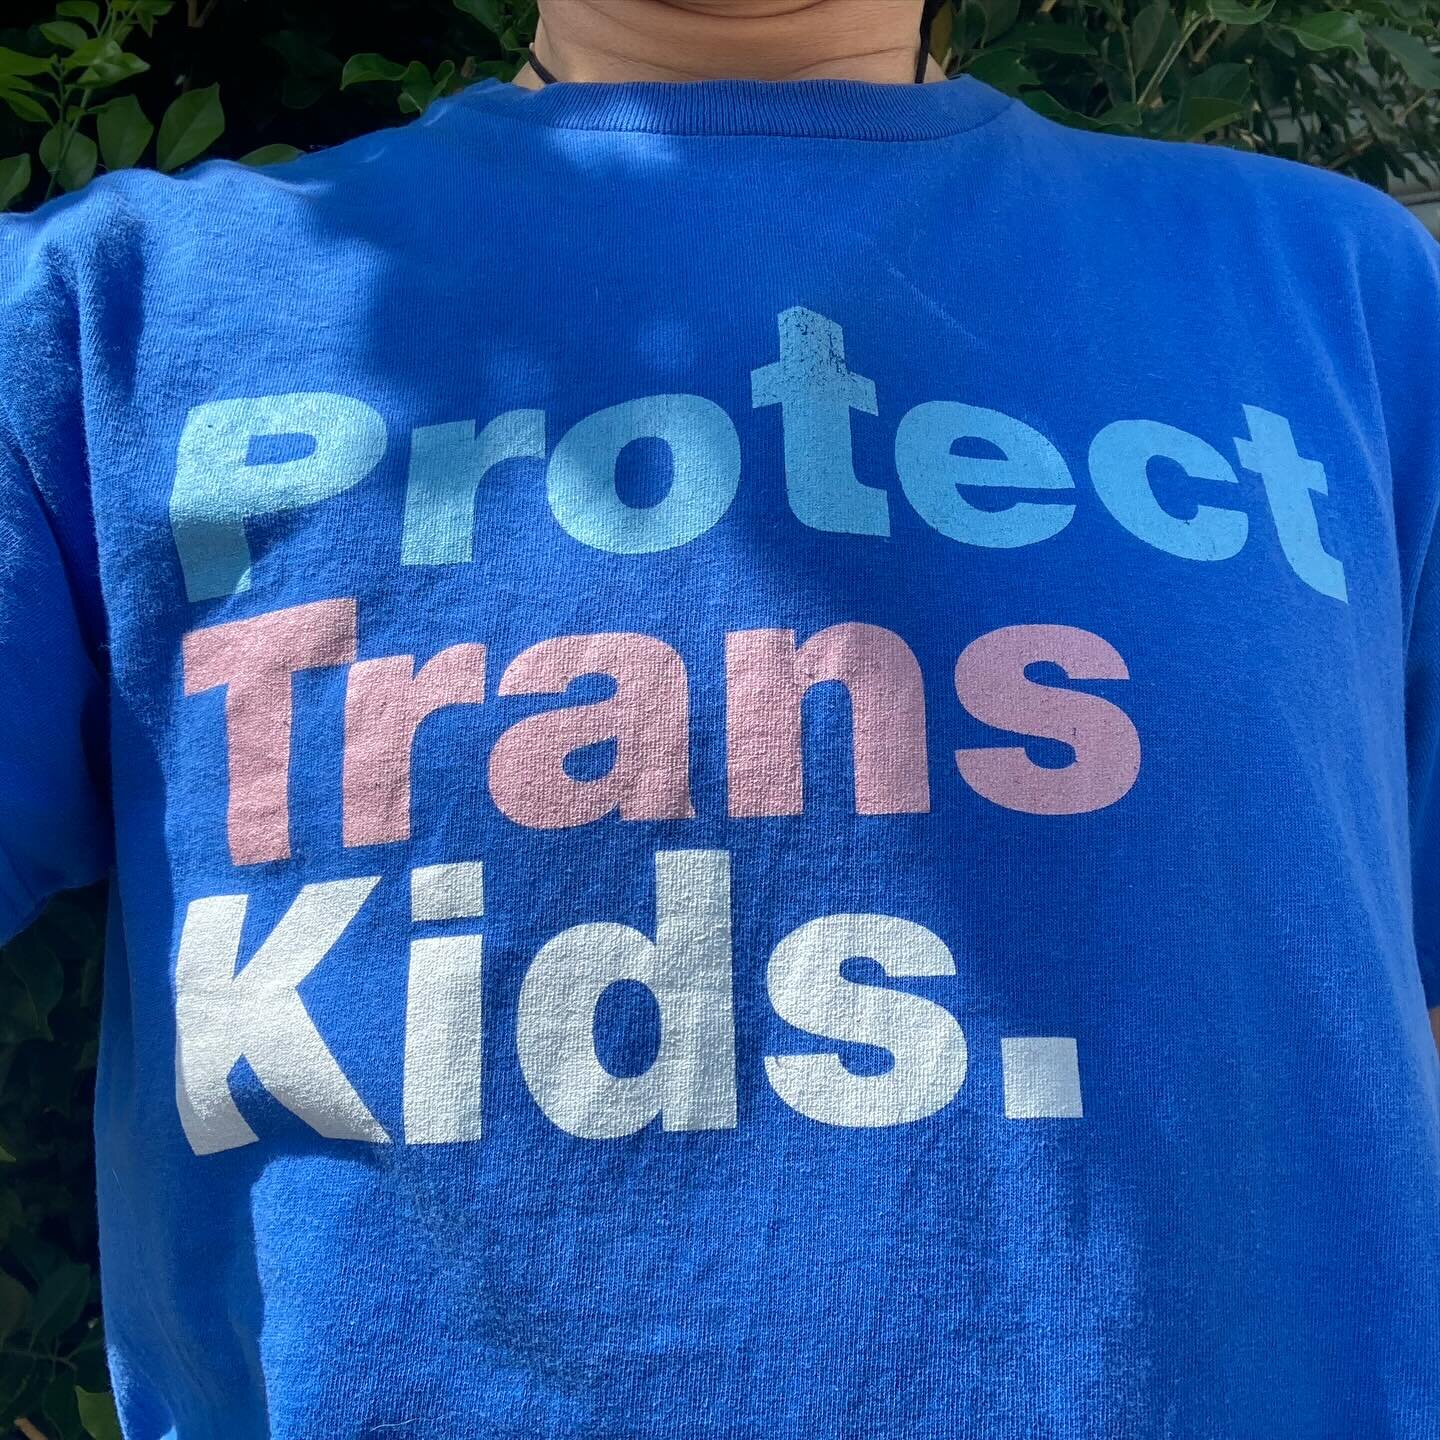 On Transgender Day Of Visibility, I&rsquo;m out on the street being visible with my support for trans, NB, and gender transcendant crew everywhere. Today, I ask everyone to ask about people&rsquo;s pronouns as a deliberate intervention against GLBTIQ